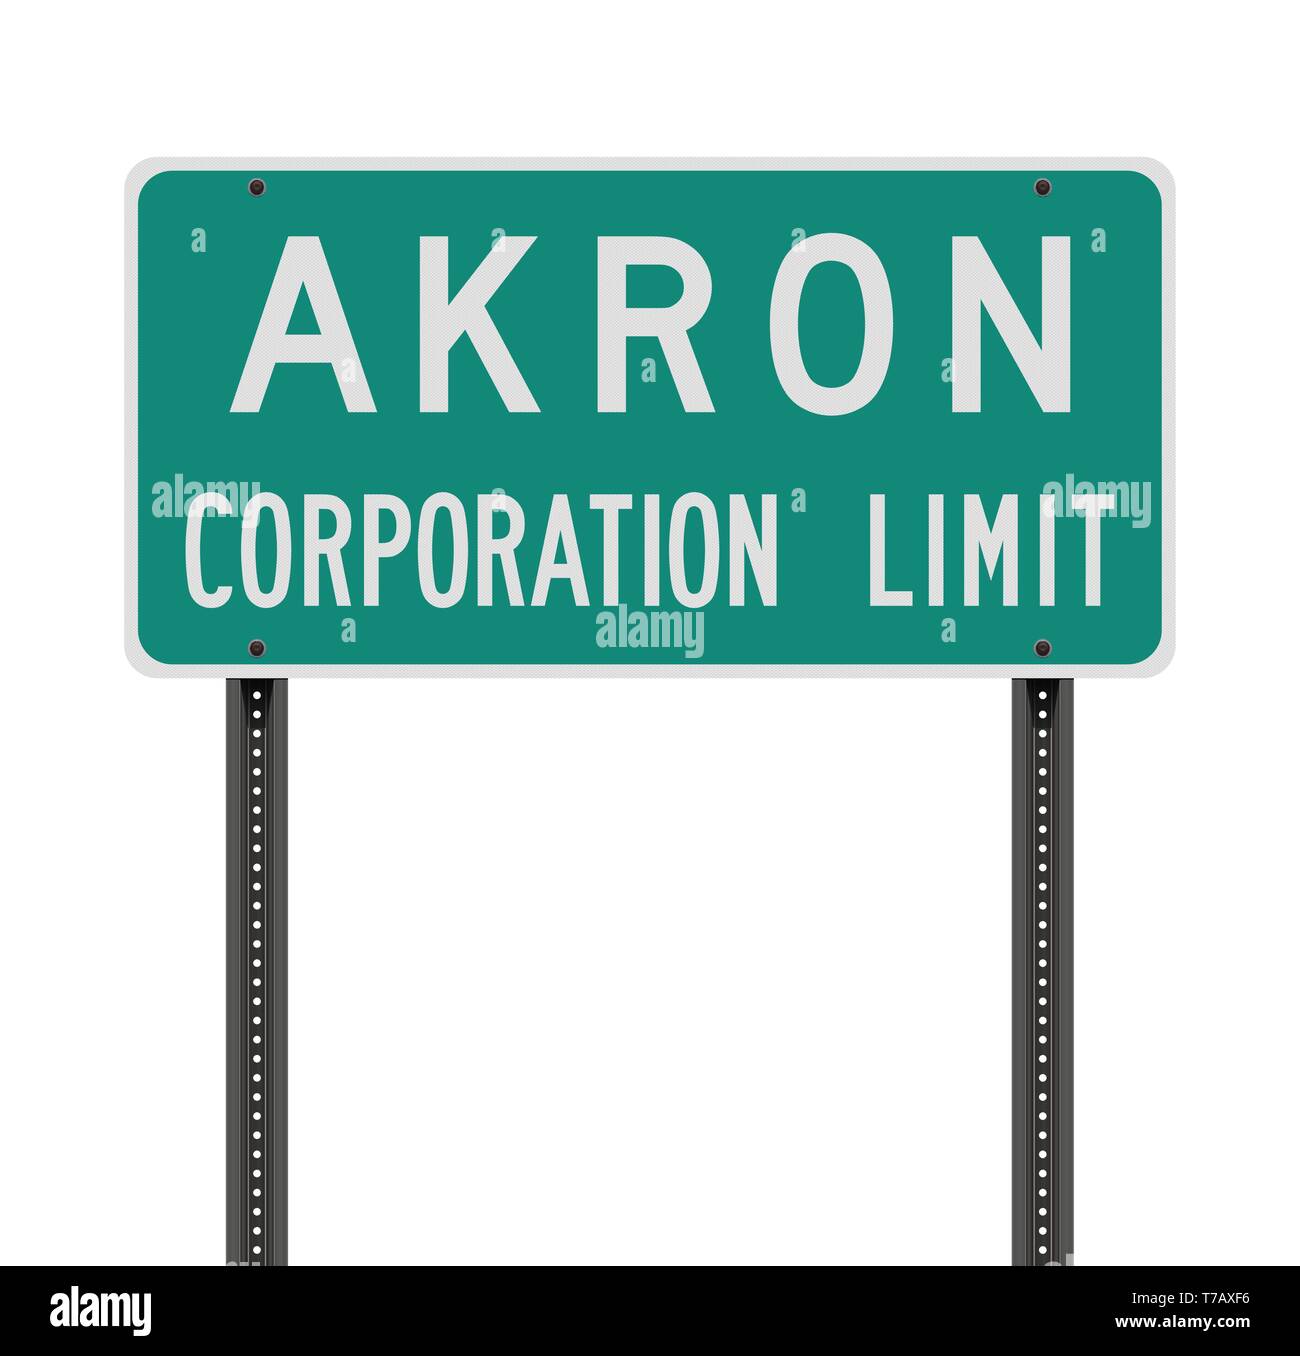 Vector illustration of the Akron Corporation Limit green road sign Stock Vector